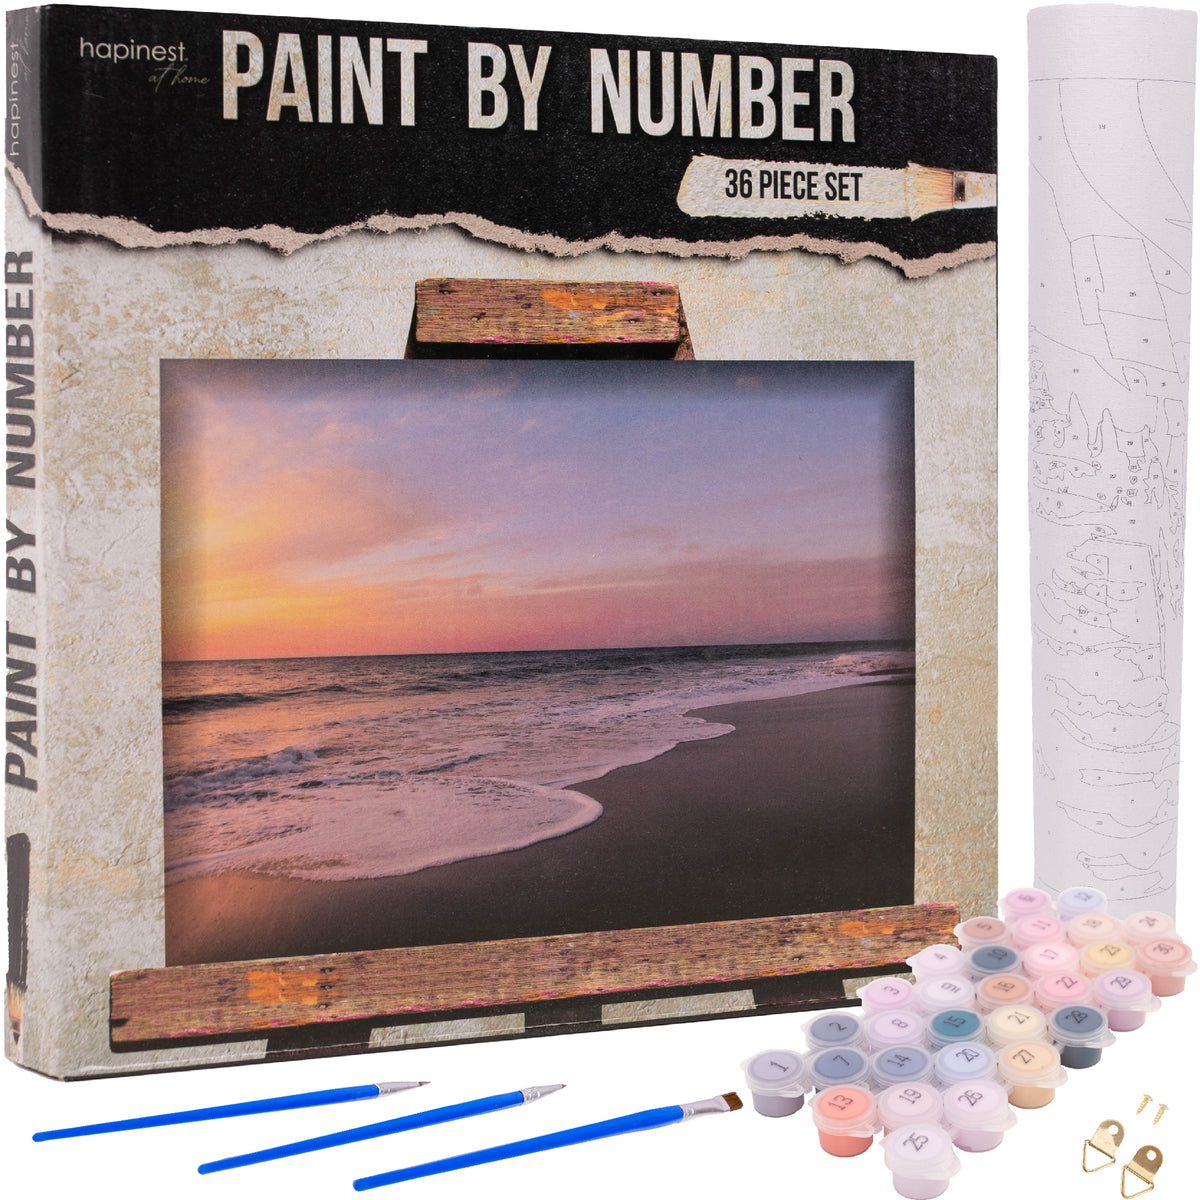 FQOVKYN Paint by Numbers Kit for Adults, Easy Sunset Adult Paint by Number Kits for Beginners, DIY Paint by Number Canvas Acrylic Paint Adult Crafts